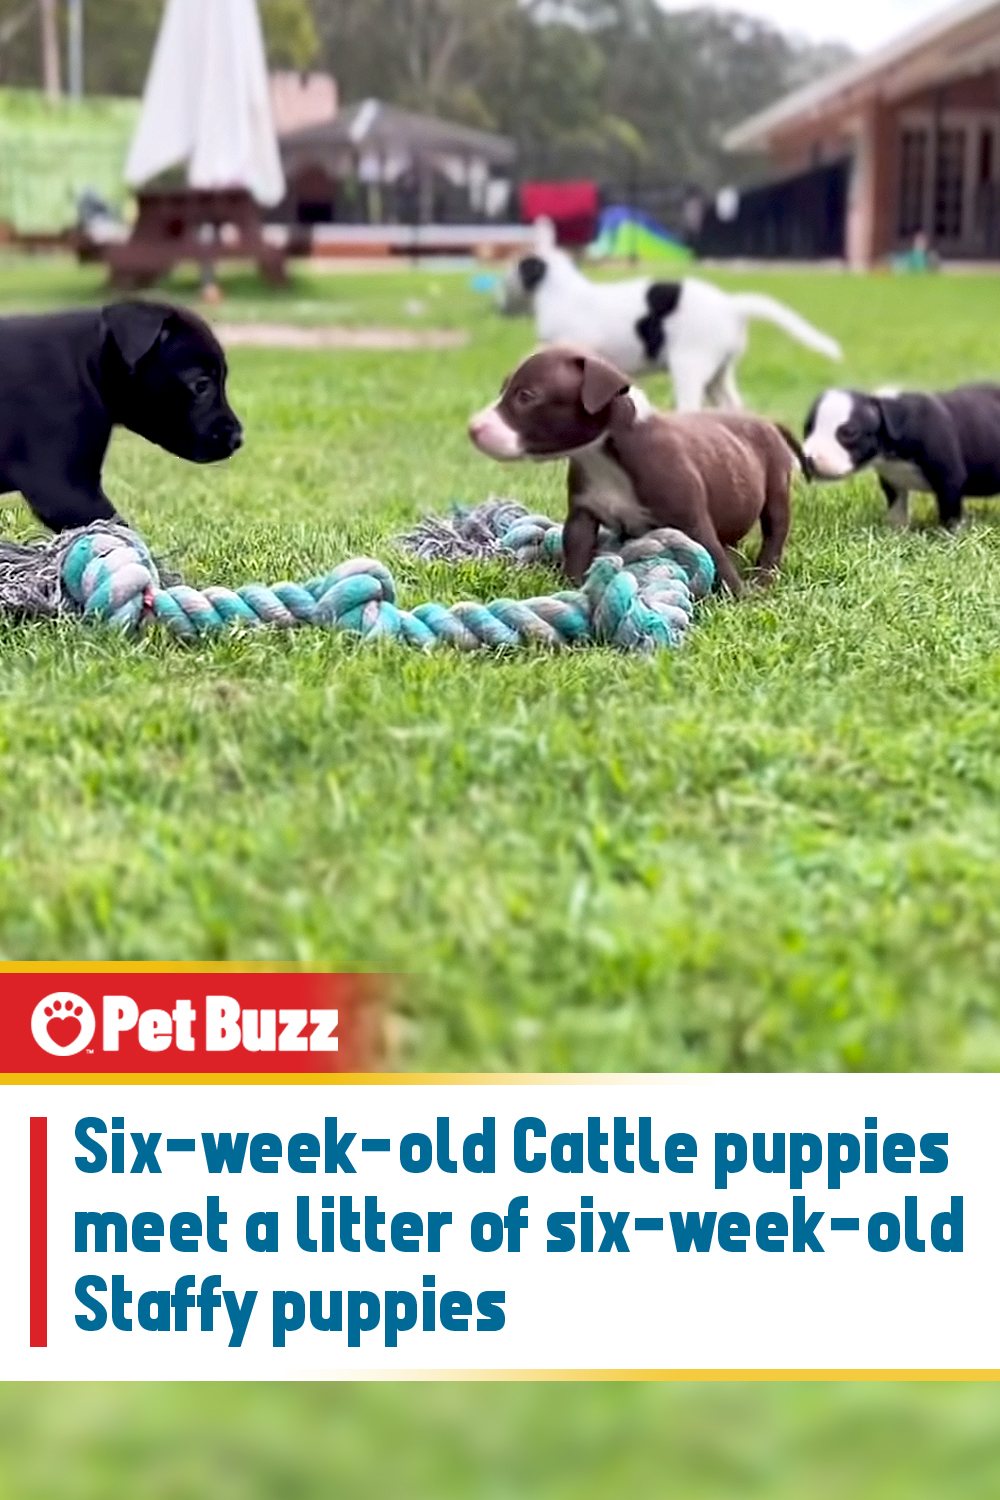 Six-week-old Cattle puppies meet a litter of six-week-old Staffy puppies